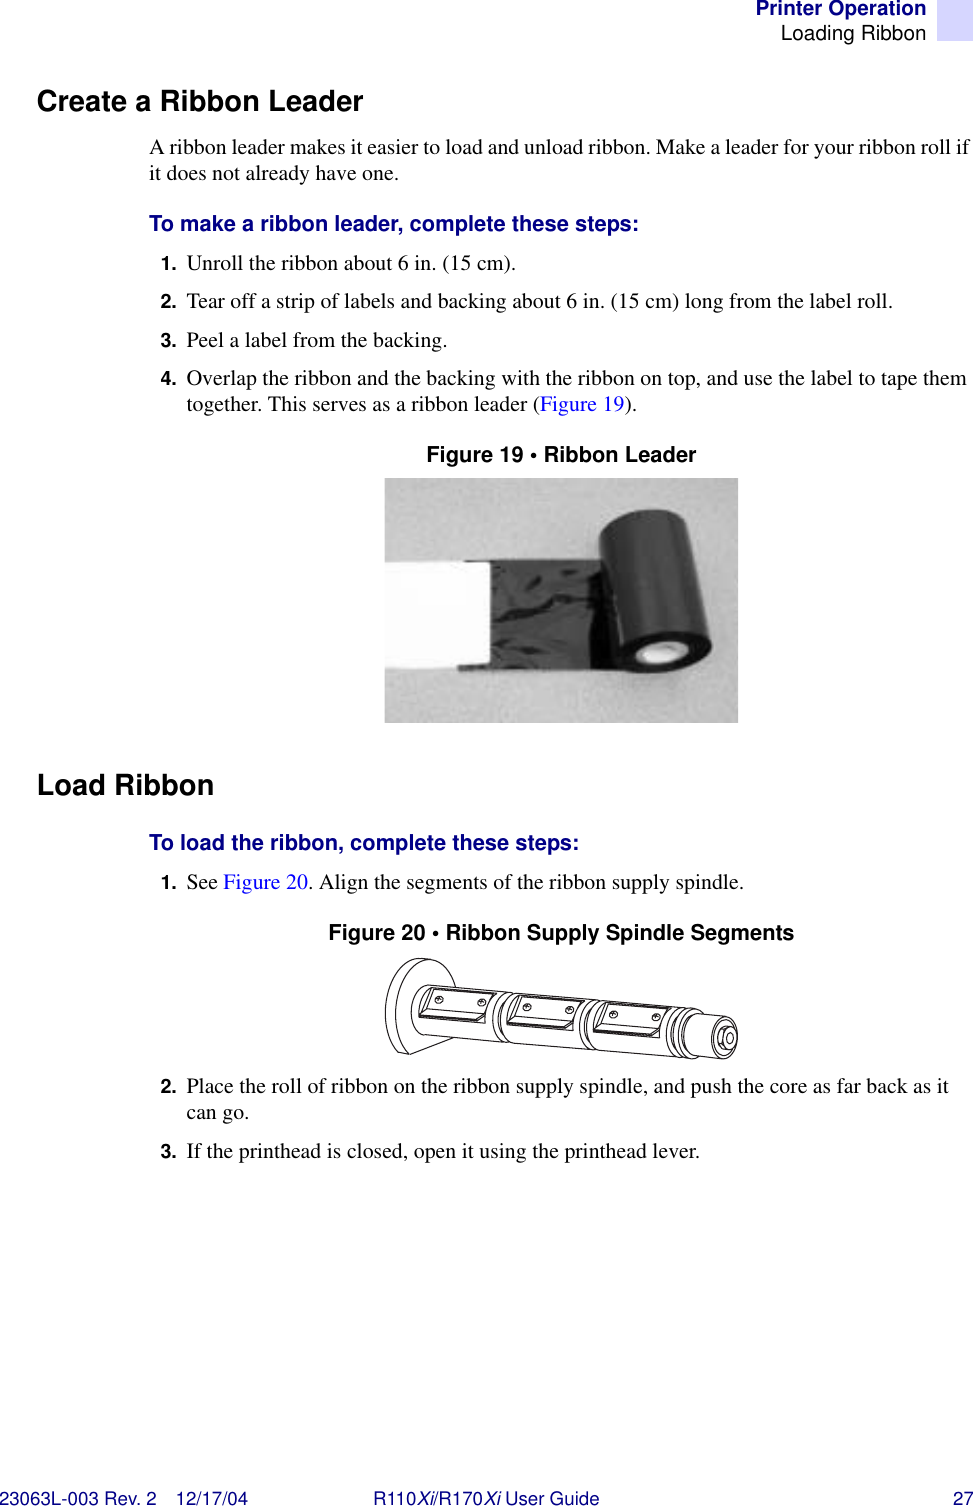 Printer OperationLoading Ribbon23063L-003 Rev. 2 12/17/04 R110Xi/R170Xi User Guide 27Create a Ribbon LeaderA ribbon leader makes it easier to load and unload ribbon. Make a leader for your ribbon roll if it does not already have one.To make a ribbon leader, complete these steps:1. Unroll the ribbon about 6 in. (15 cm).2. Tear off a strip of labels and backing about 6 in. (15 cm) long from the label roll.3. Peel a label from the backing.4. Overlap the ribbon and the backing with the ribbon on top, and use the label to tape them together. This serves as a ribbon leader (Figure 19).Figure 19 • Ribbon LeaderLoad RibbonTo load the ribbon, complete these steps:1. See Figure 20. Align the segments of the ribbon supply spindle.Figure 20 • Ribbon Supply Spindle Segments2. Place the roll of ribbon on the ribbon supply spindle, and push the core as far back as it can go.3. If the printhead is closed, open it using the printhead lever.